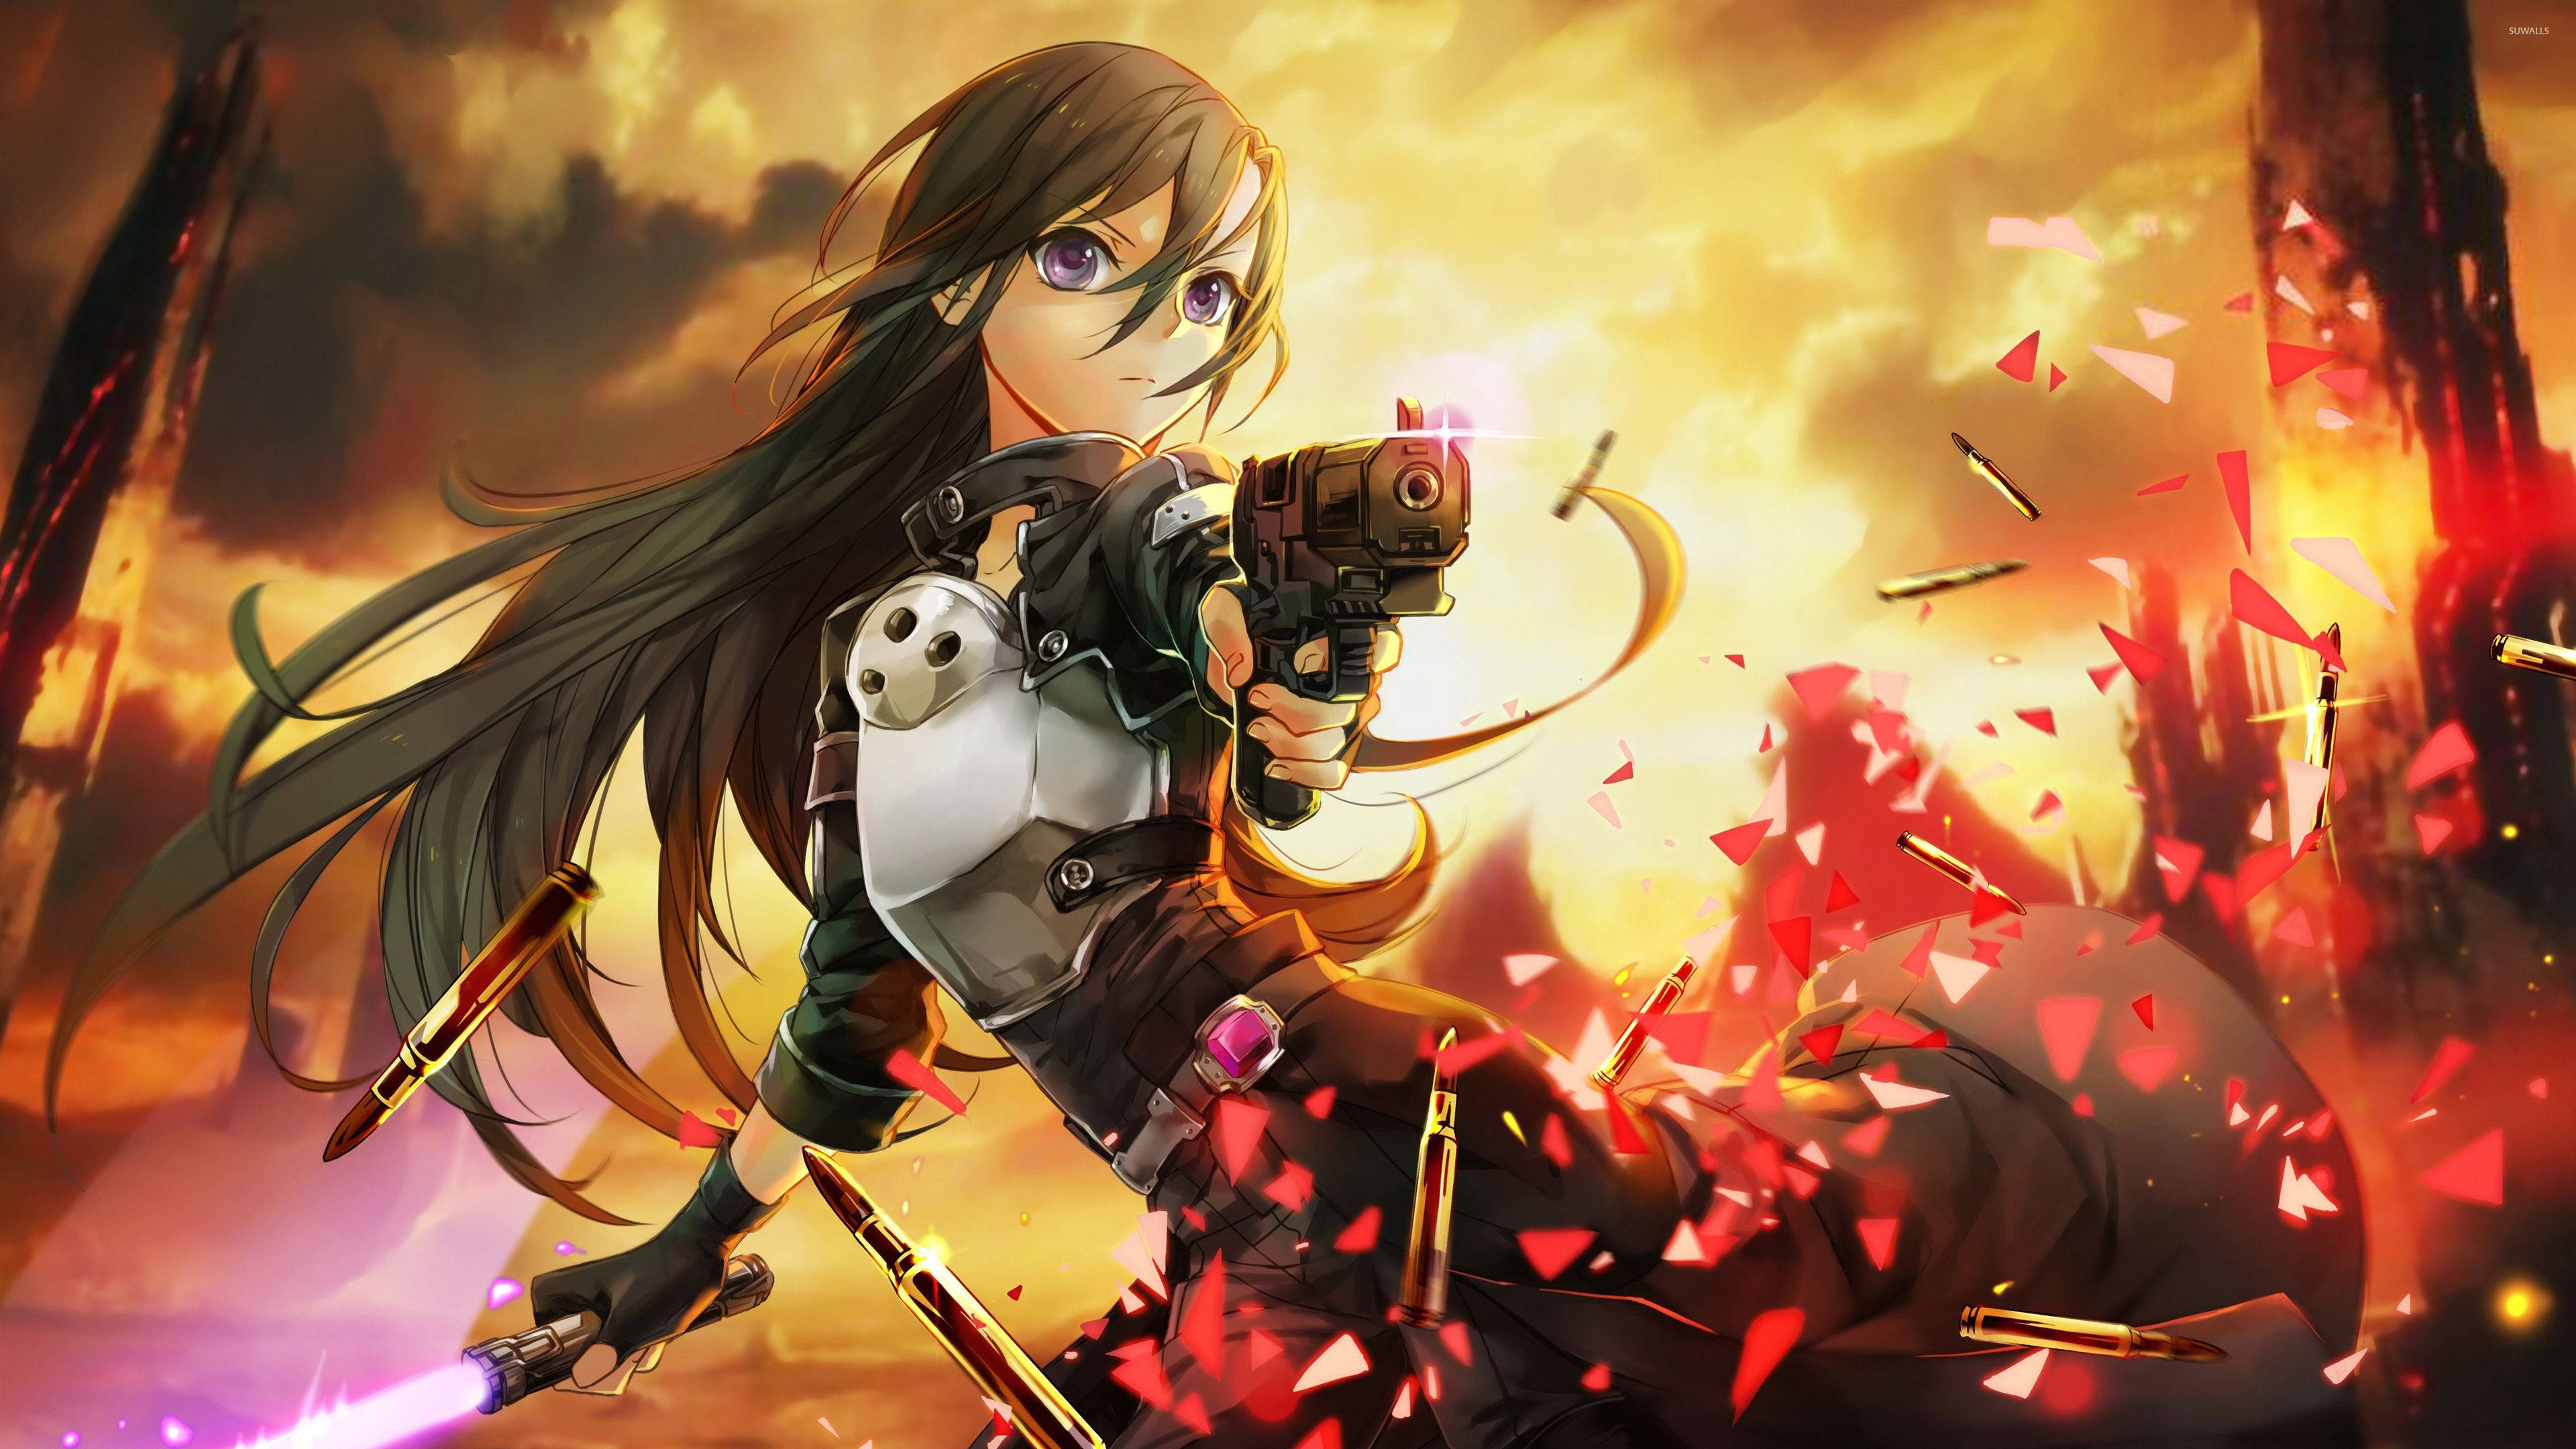 A Girl With Long Hair And A Gun In Her Hands Background